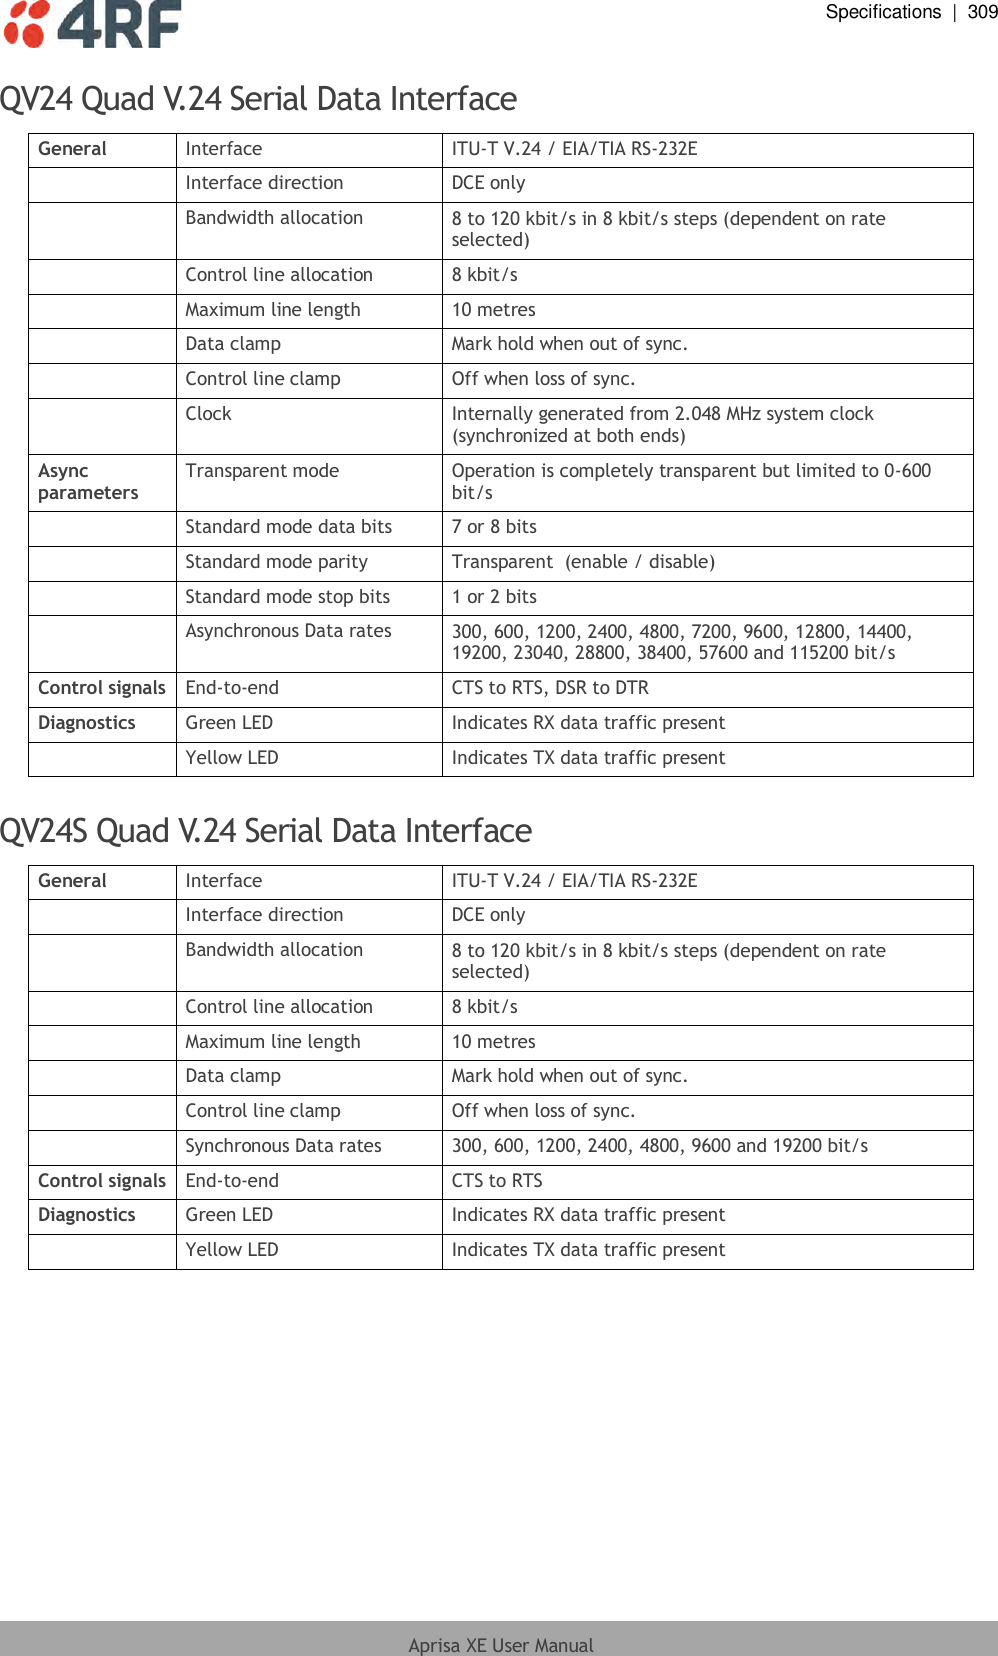  Specifications  |  309  Aprisa XE User Manual  QV24 Quad V.24 Serial Data Interface General Interface ITU-T V.24 / EIA/TIA RS-232E  Interface direction DCE only  Bandwidth allocation 8 to 120 kbit/s in 8 kbit/s steps (dependent on rate selected)  Control line allocation 8 kbit/s  Maximum line length 10 metres  Data clamp Mark hold when out of sync.  Control line clamp Off when loss of sync.  Clock Internally generated from 2.048 MHz system clock (synchronized at both ends) Async parameters Transparent mode Operation is completely transparent but limited to 0-600 bit/s  Standard mode data bits 7 or 8 bits  Standard mode parity Transparent  (enable / disable)  Standard mode stop bits 1 or 2 bits  Asynchronous Data rates 300, 600, 1200, 2400, 4800, 7200, 9600, 12800, 14400, 19200, 23040, 28800, 38400, 57600 and 115200 bit/s Control signals End-to-end CTS to RTS, DSR to DTR Diagnostics Green LED Indicates RX data traffic present  Yellow LED Indicates TX data traffic present  QV24S Quad V.24 Serial Data Interface General Interface ITU-T V.24 / EIA/TIA RS-232E  Interface direction DCE only  Bandwidth allocation 8 to 120 kbit/s in 8 kbit/s steps (dependent on rate selected)  Control line allocation 8 kbit/s  Maximum line length 10 metres  Data clamp Mark hold when out of sync.  Control line clamp Off when loss of sync.  Synchronous Data rates 300, 600, 1200, 2400, 4800, 9600 and 19200 bit/s Control signals End-to-end CTS to RTS Diagnostics Green LED Indicates RX data traffic present  Yellow LED Indicates TX data traffic present  